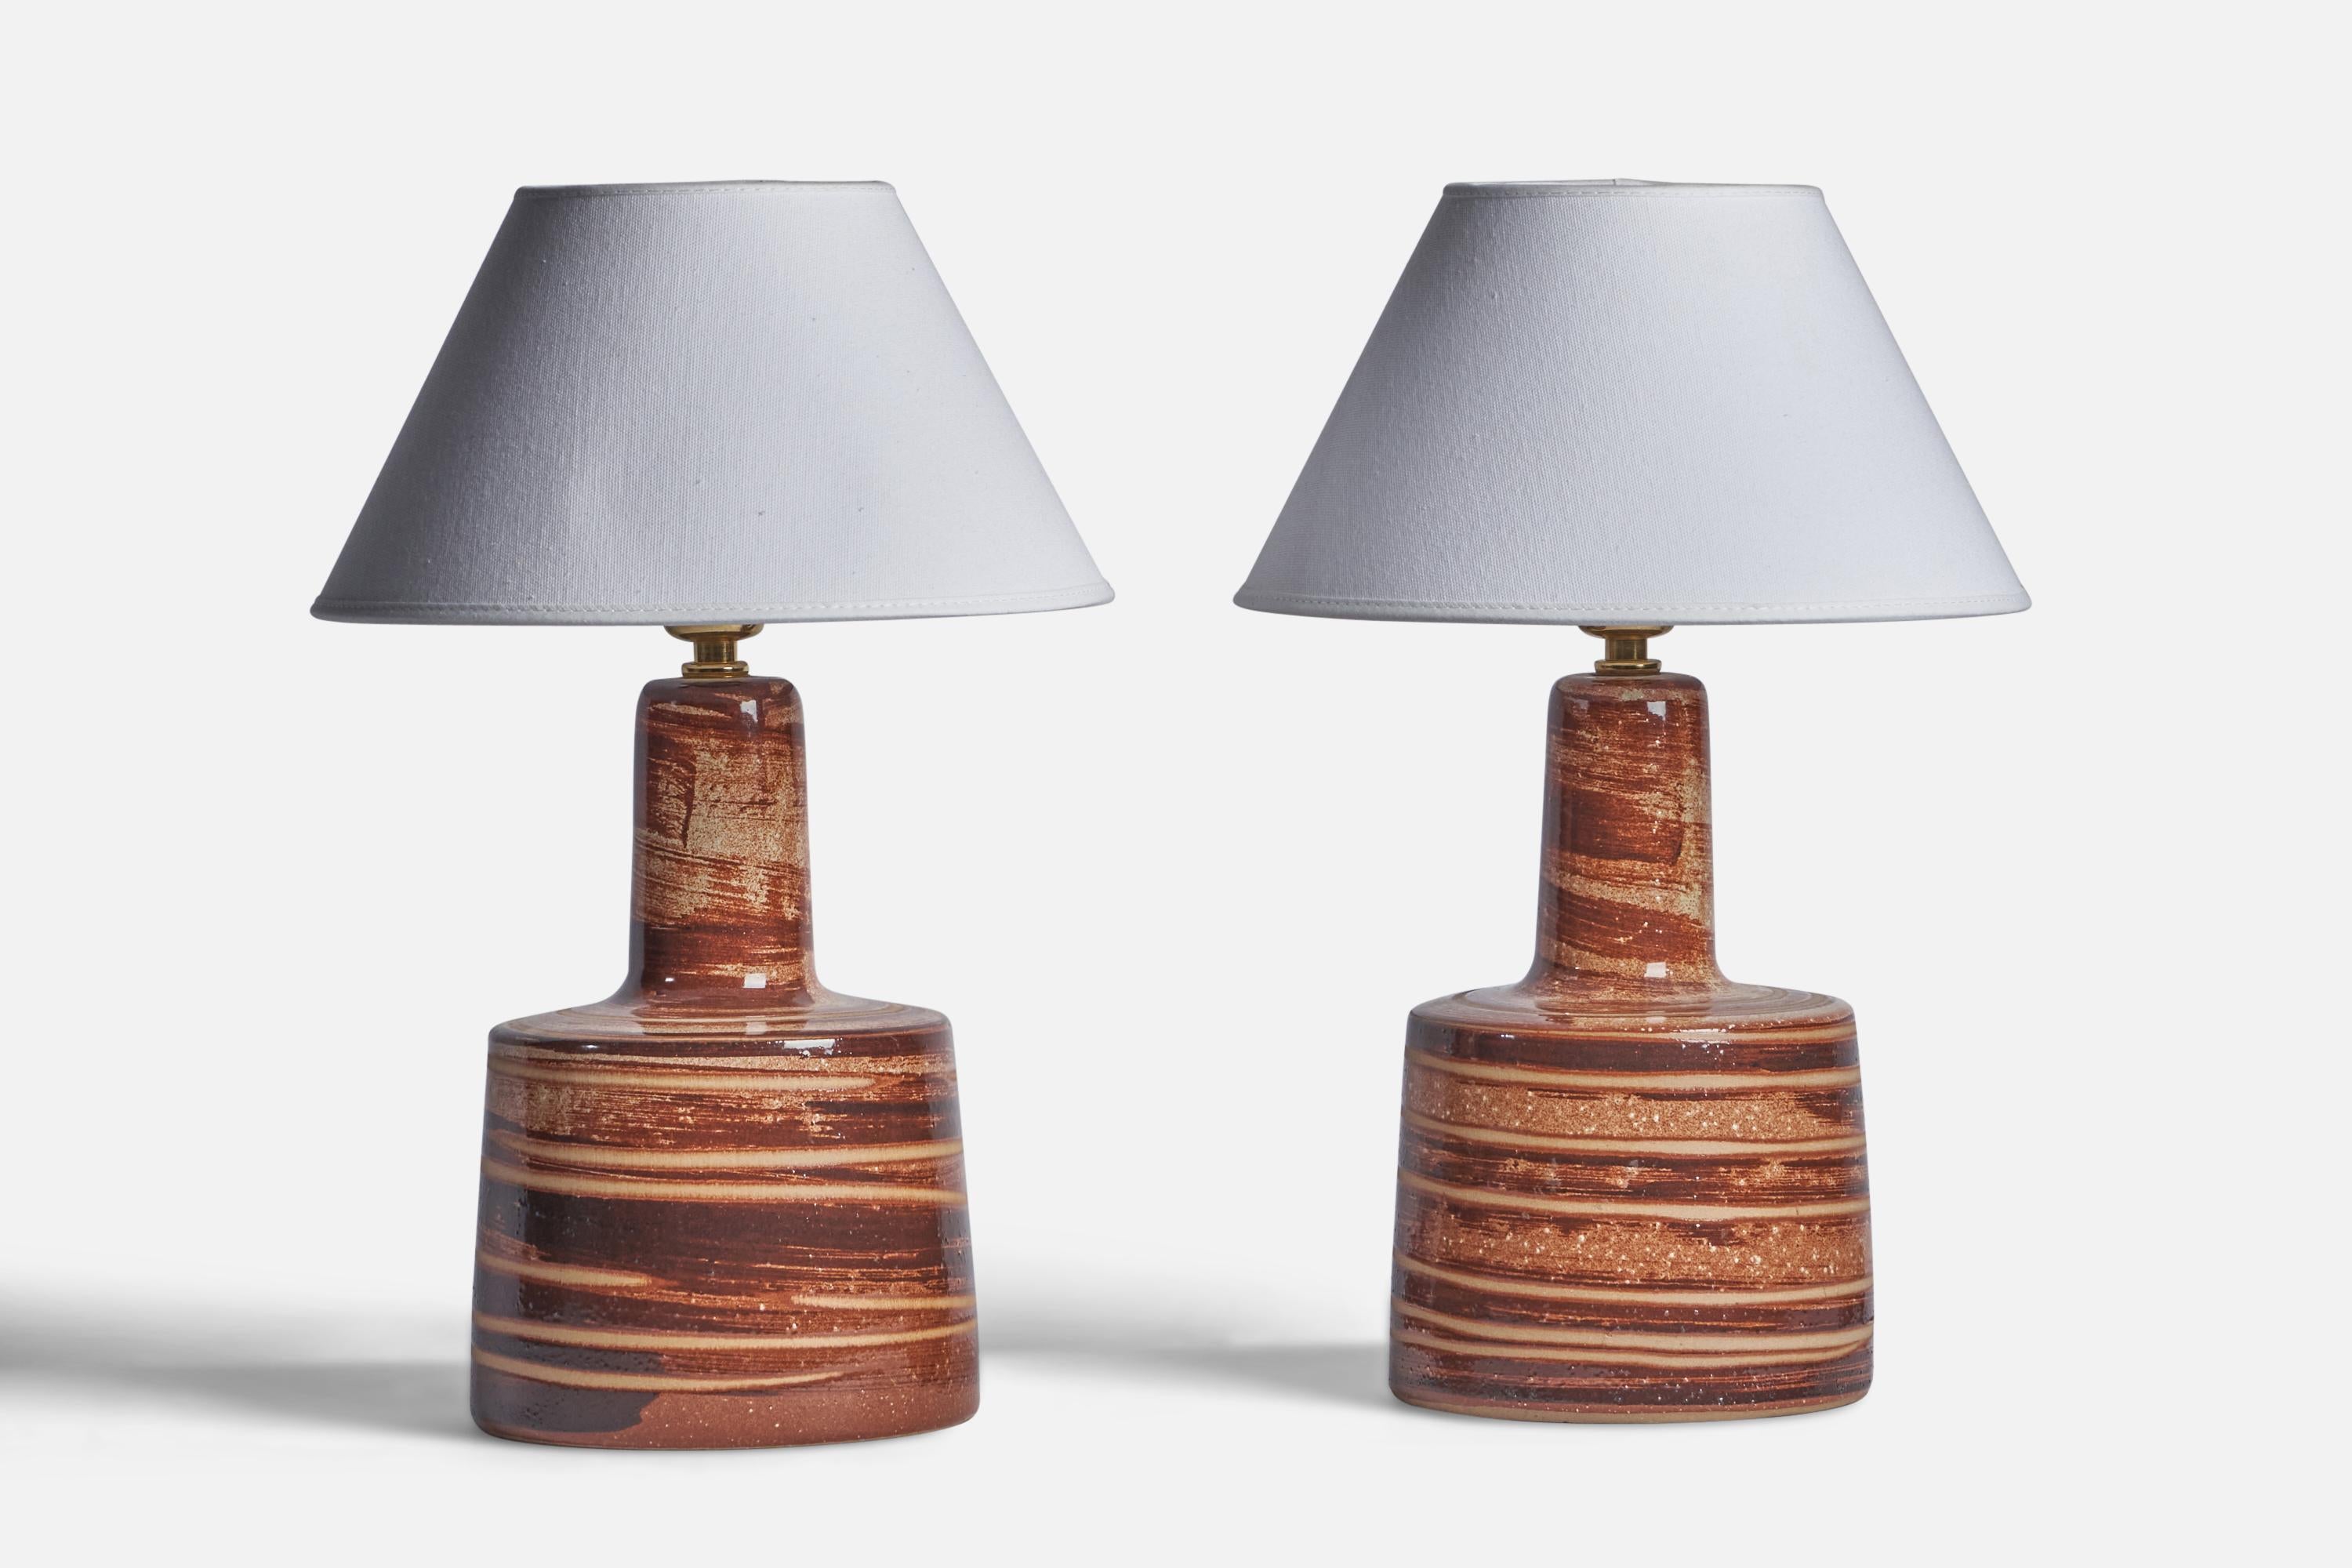 A pair of beige and brown-glazed ceramic table lamps designed by Jane & Gordon Martz and produced by Marshall Studios, USA, 1960s.

Dimensions of Lamp (inches): 12.15” H x 6.25” Diameter
Dimensions of Shade (inches): 4.5” Top Diameter x 10” Bottom